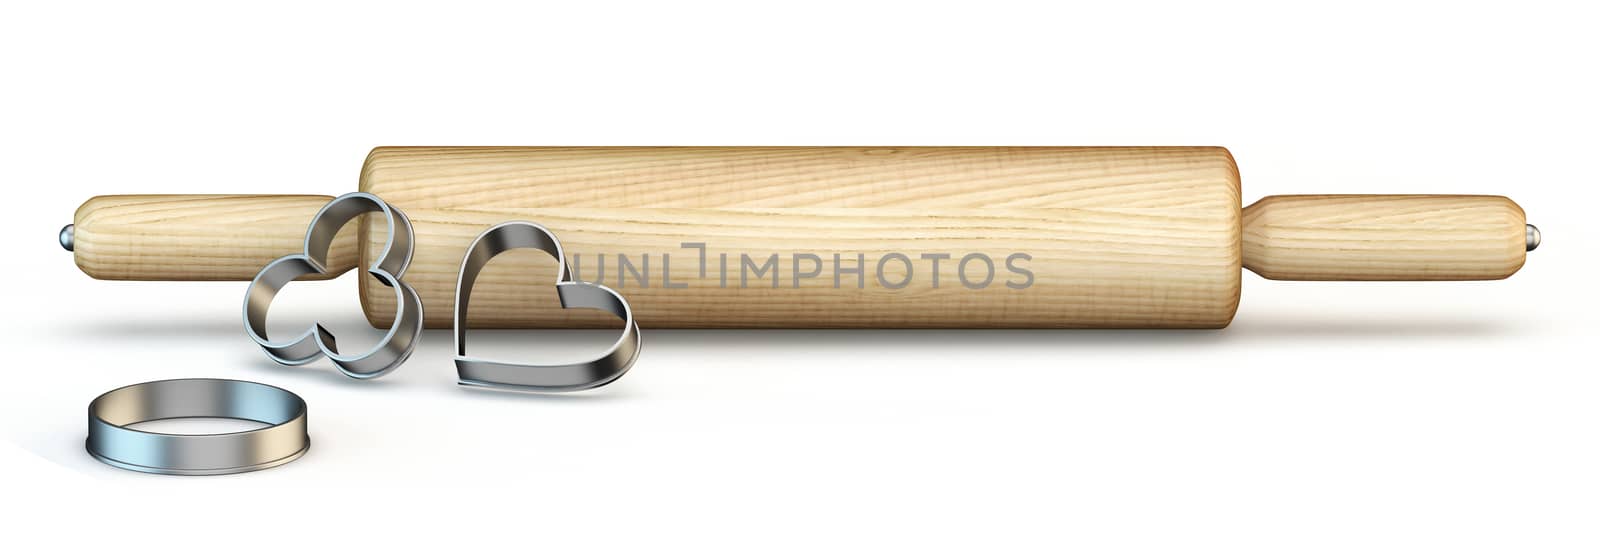 Wooden rolling pin and cookie cutter 3D rendering illustration isolated on white background